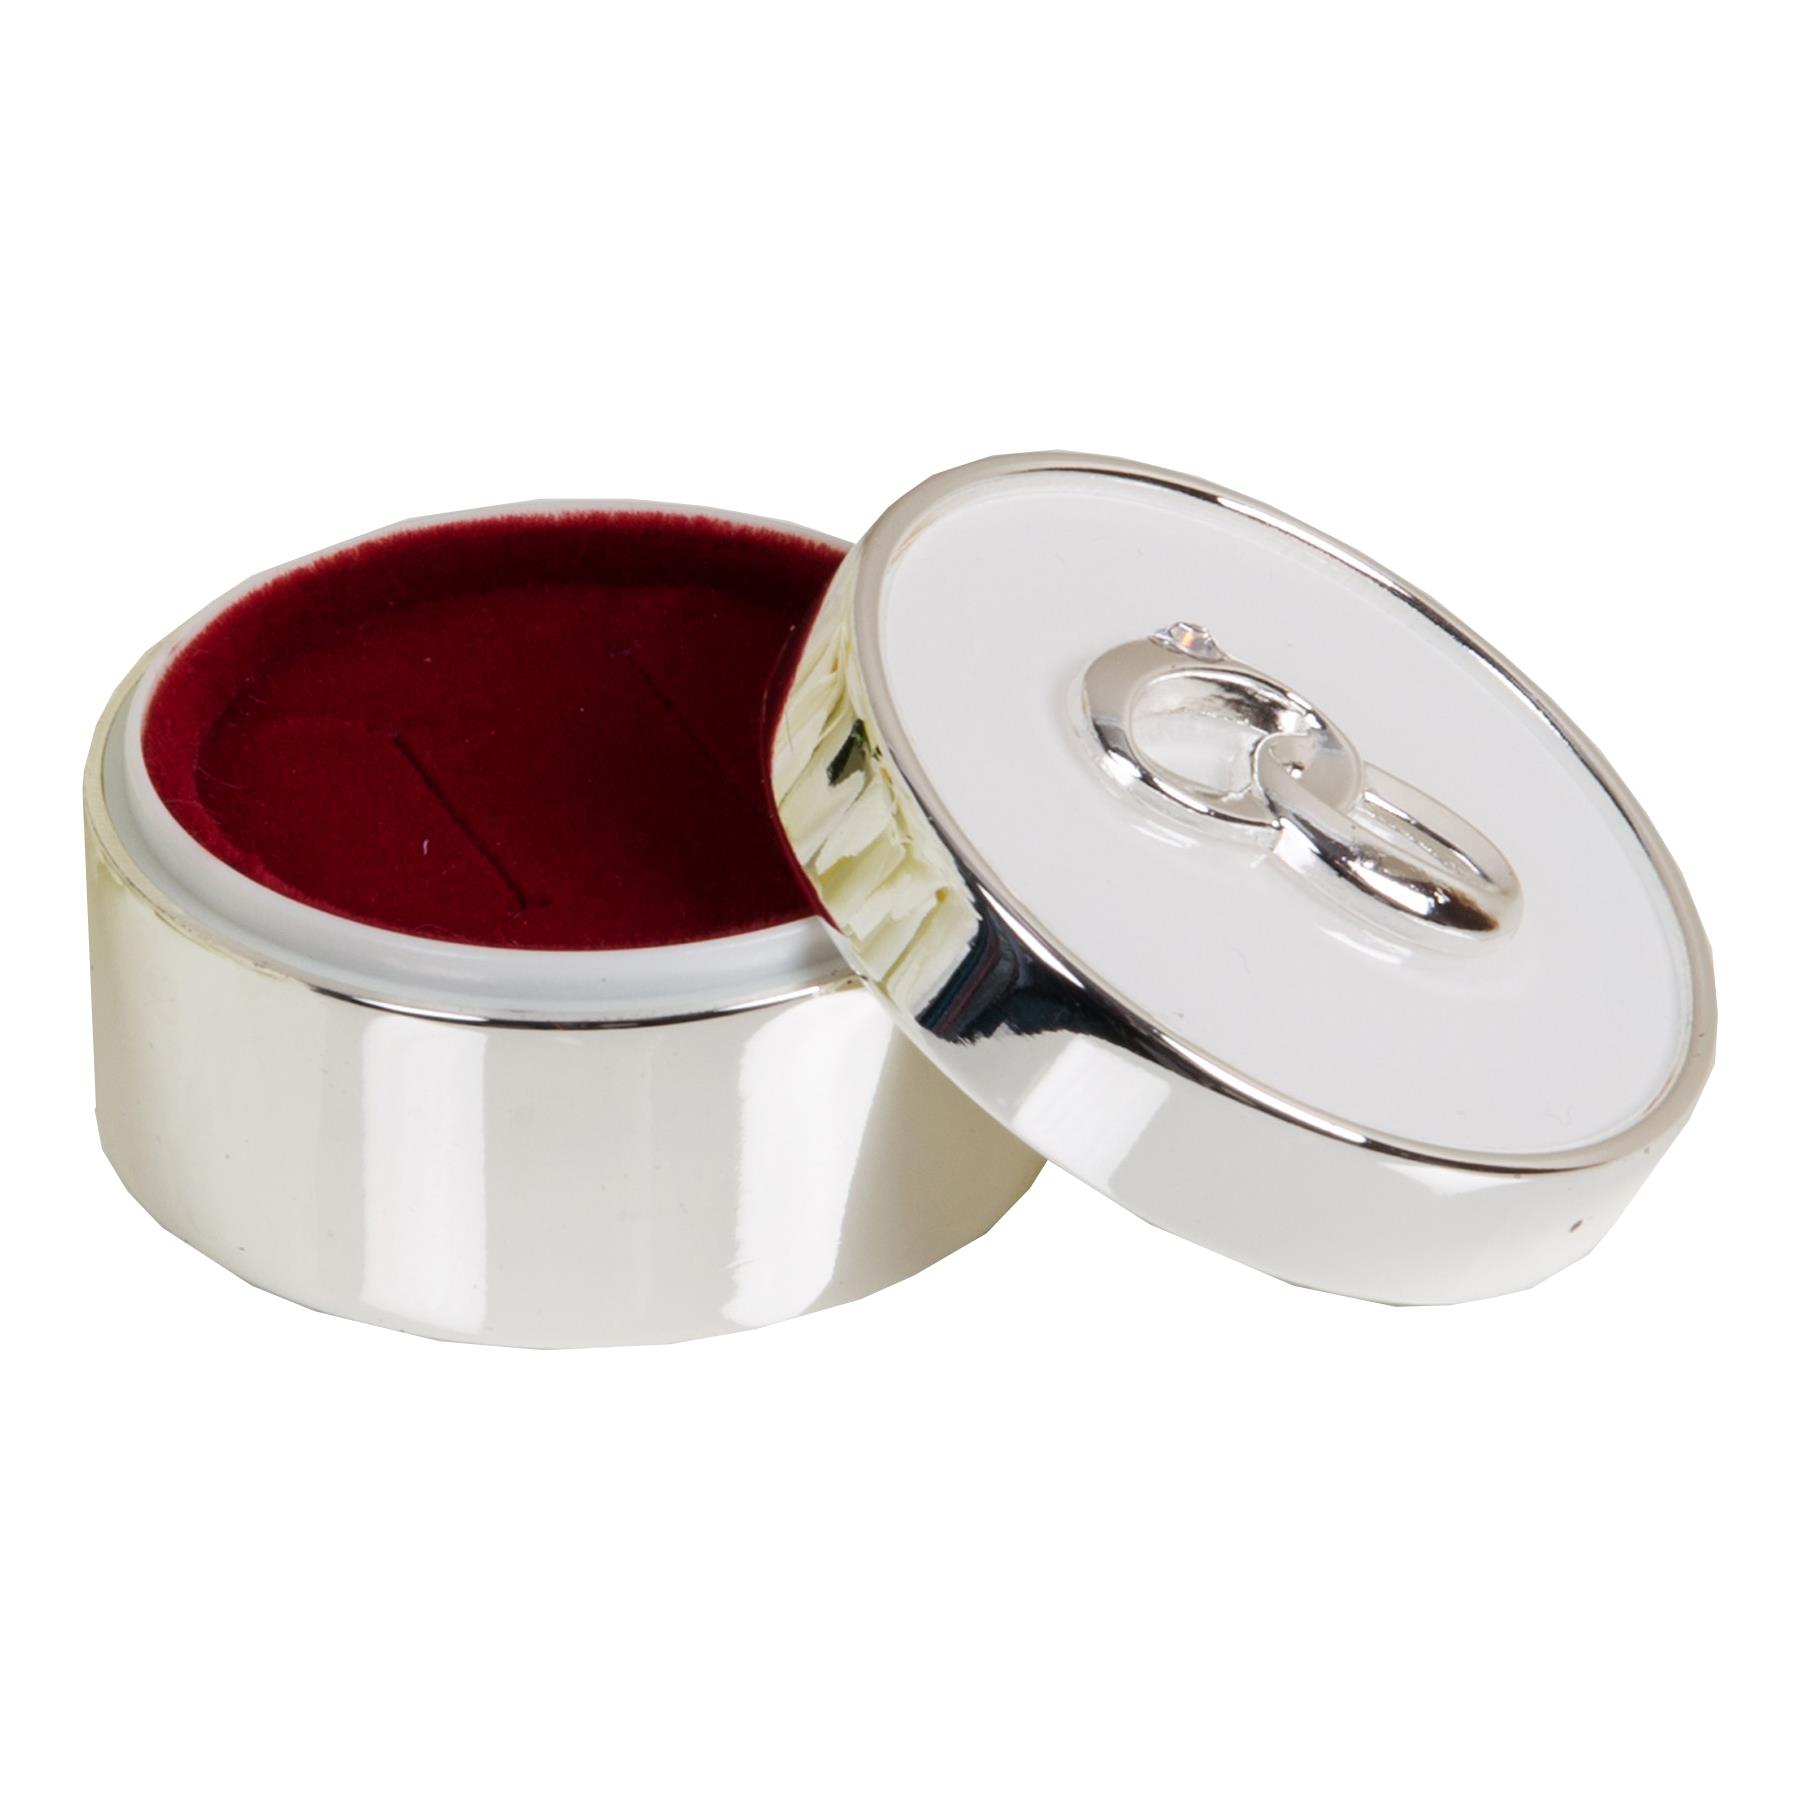 Amore Wedding Day or Engagement Silver Plated and White Epoxy Ring Box